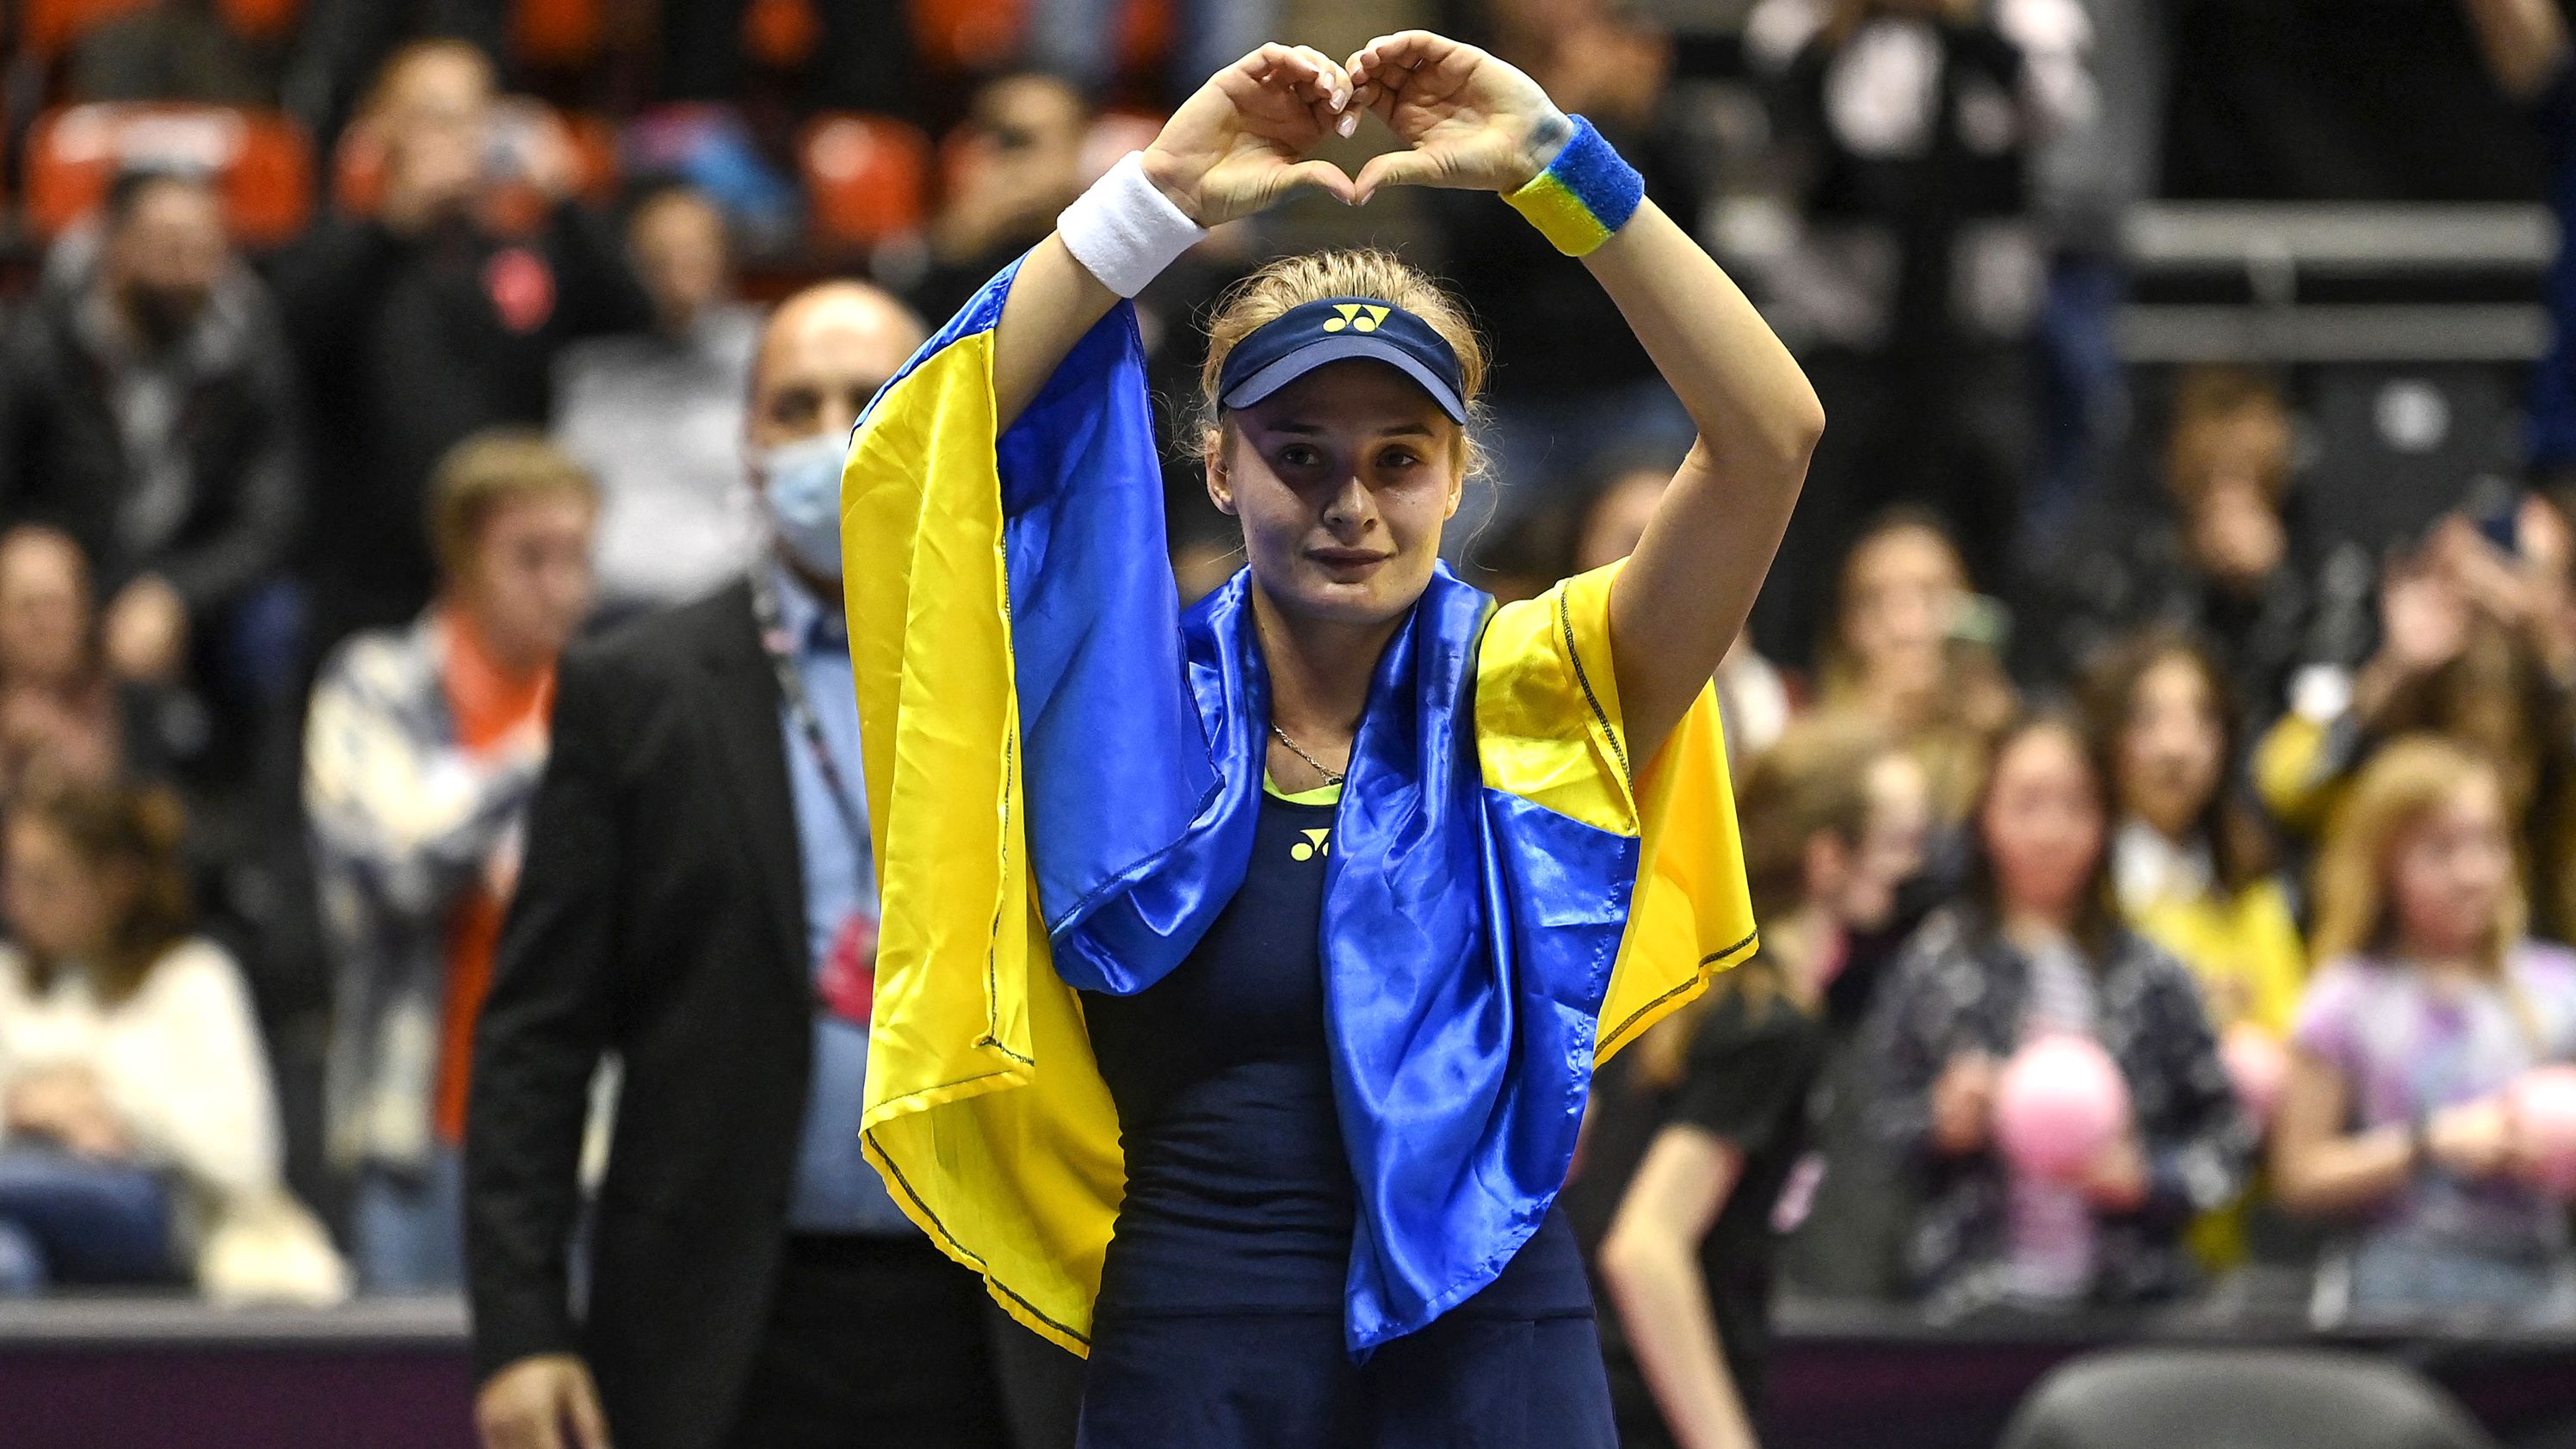 Ukraine's Dayana Yastremska reaching the Lyon WTA final on March 6, just a week after escaping Russian bomb attacks on her home city of Odessa.